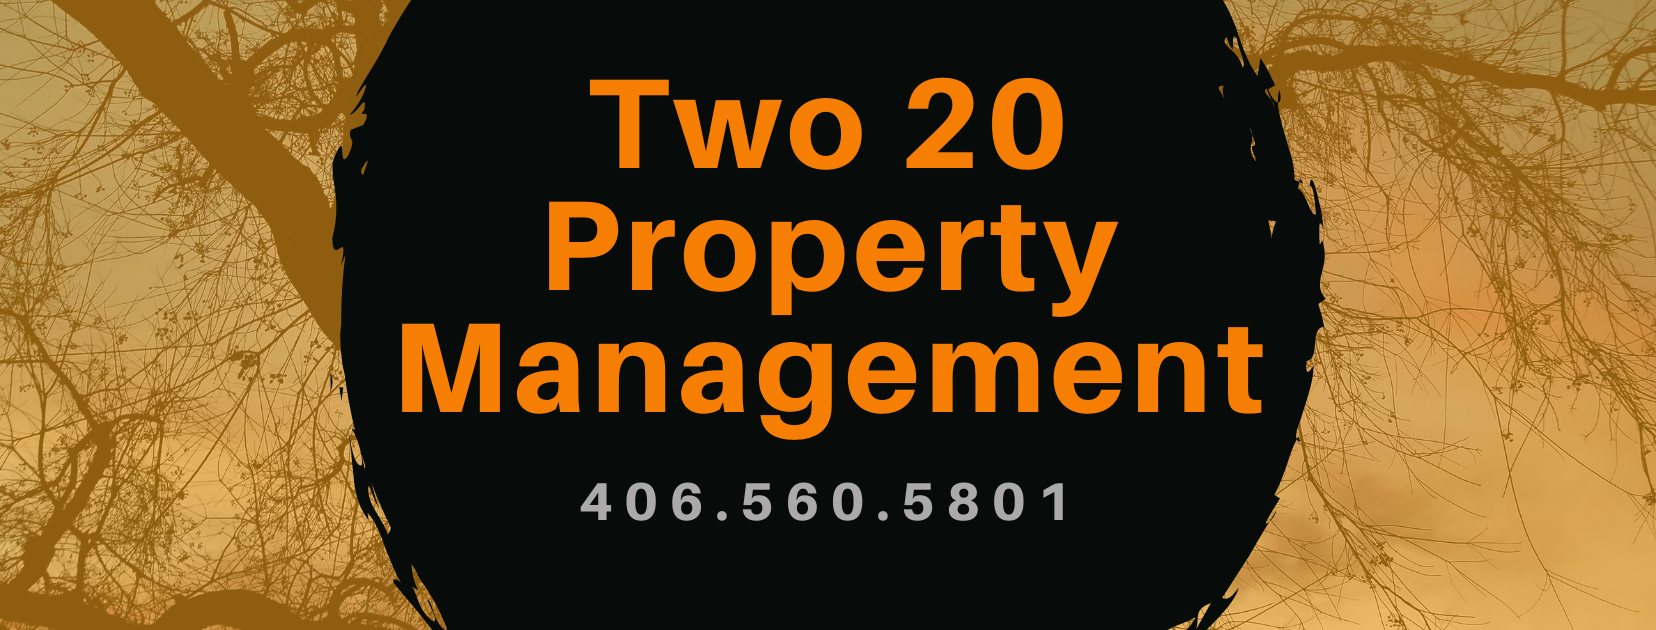 Two 20 Property Management